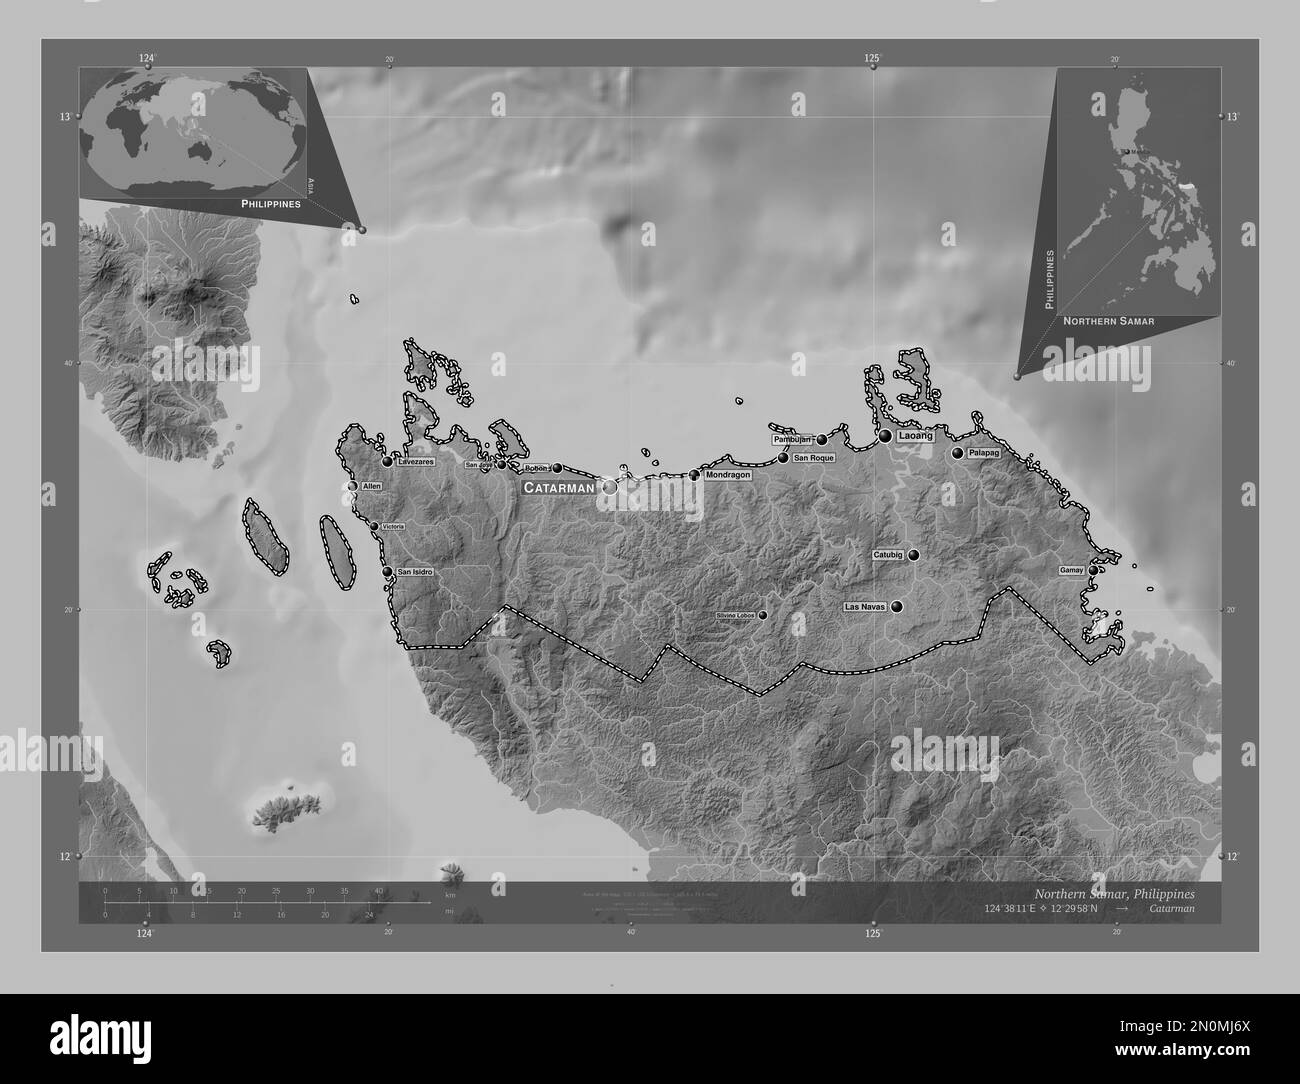 Northern Samar, province of Philippines. Grayscale elevation map with lakes and rivers. Locations and names of major cities of the region. Corner auxi Stock Photo